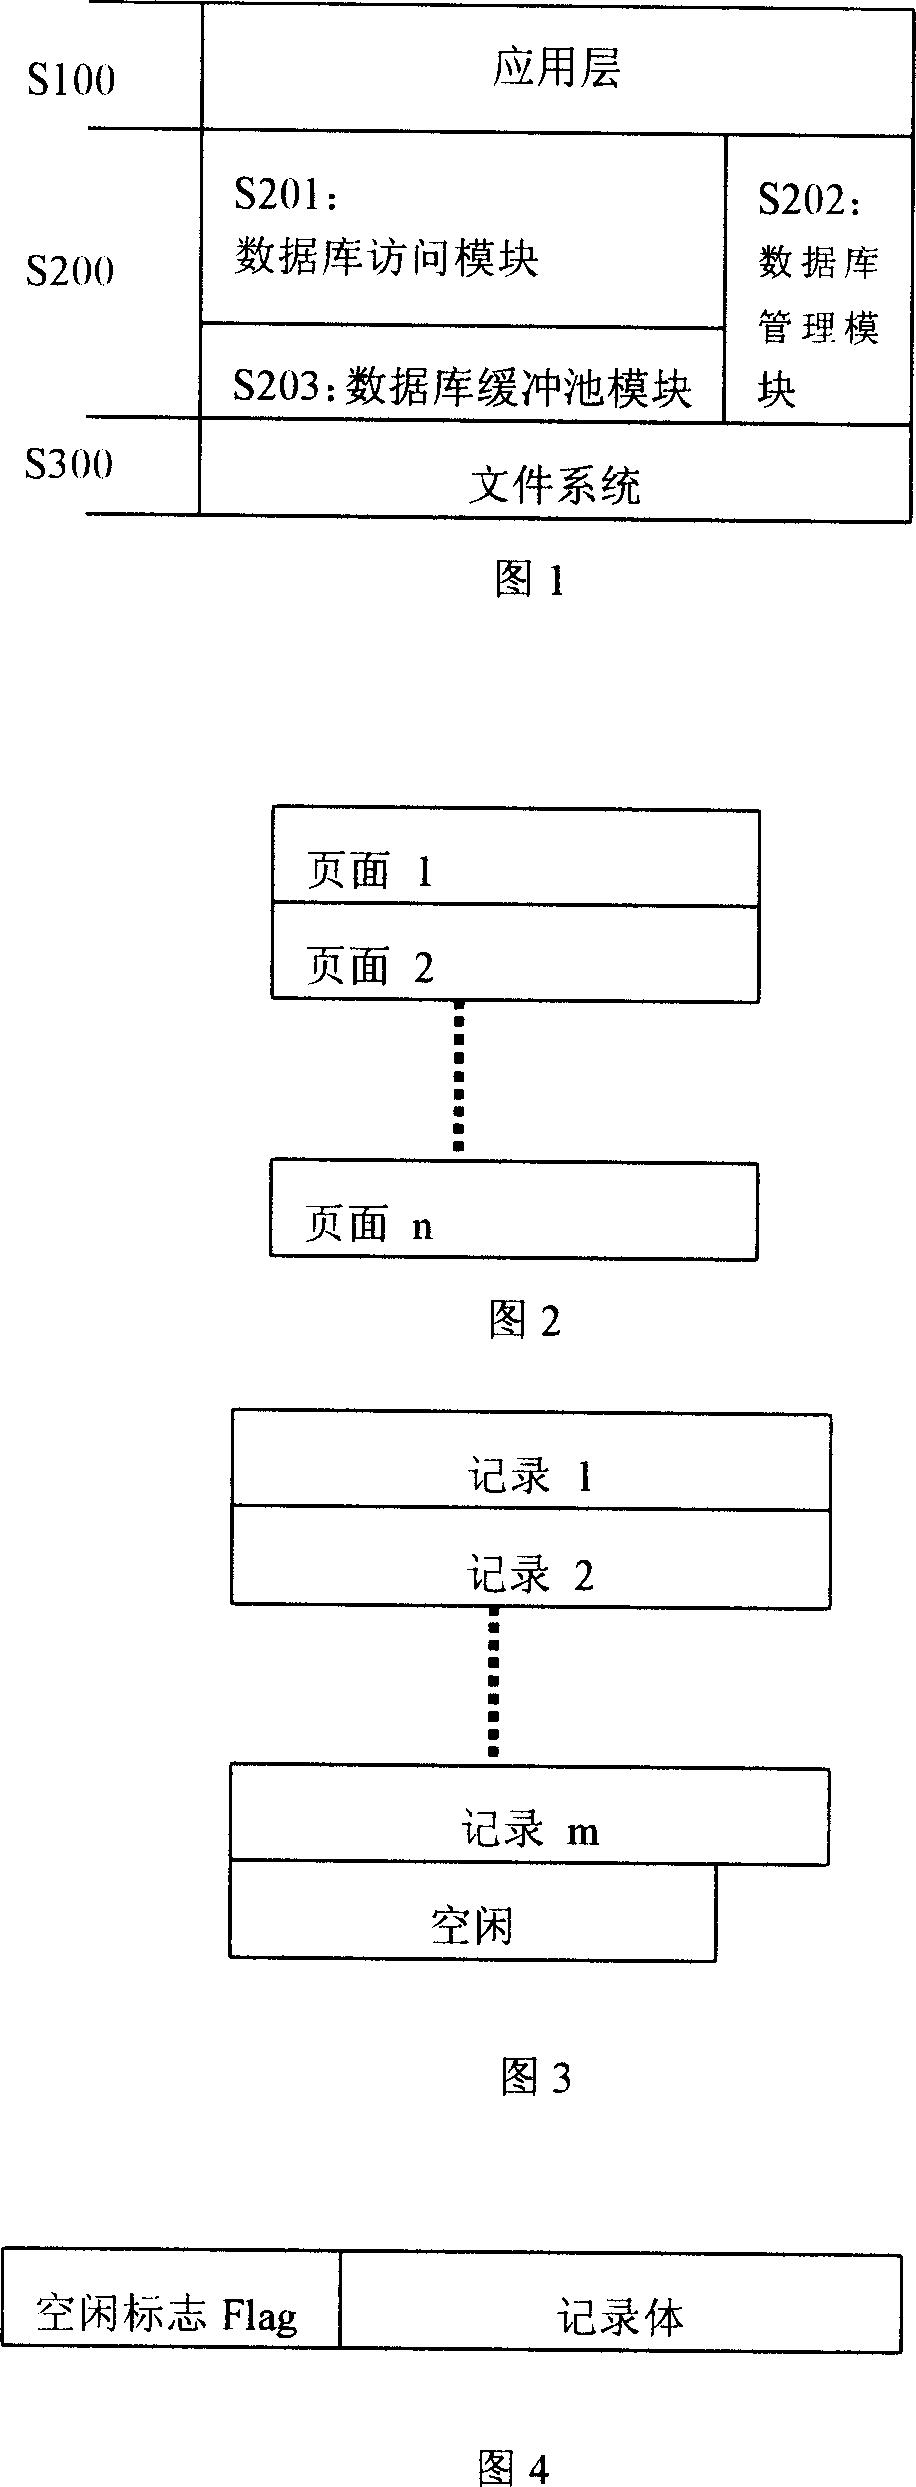 Method of storing and accessing embedded database